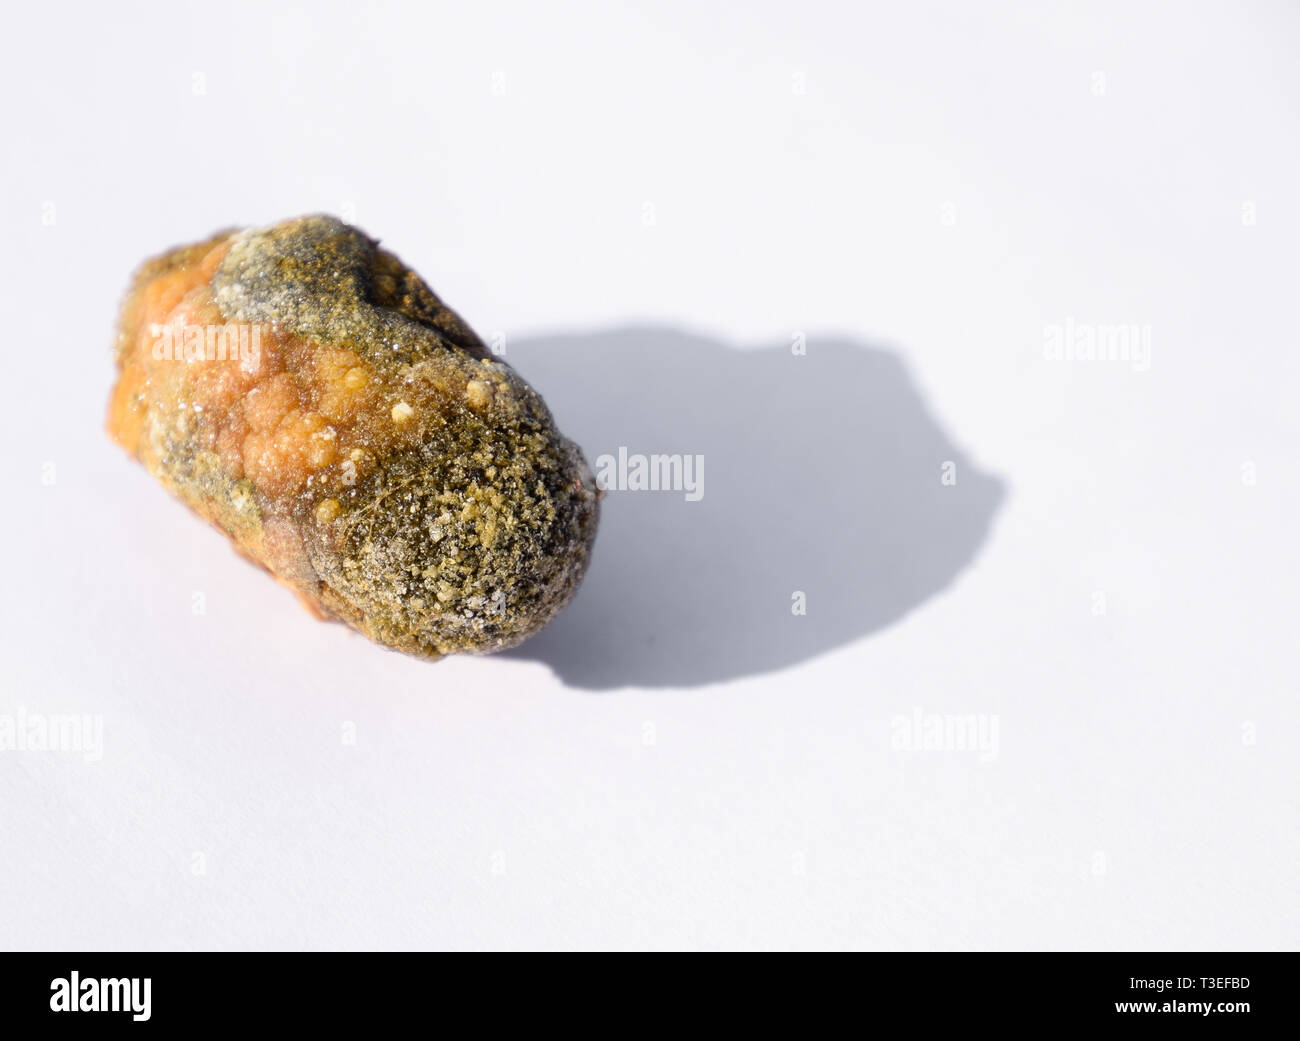 Stone of the gallbladder. The result of gallstones. A calculus of heterogeneous composition. Stock Photo